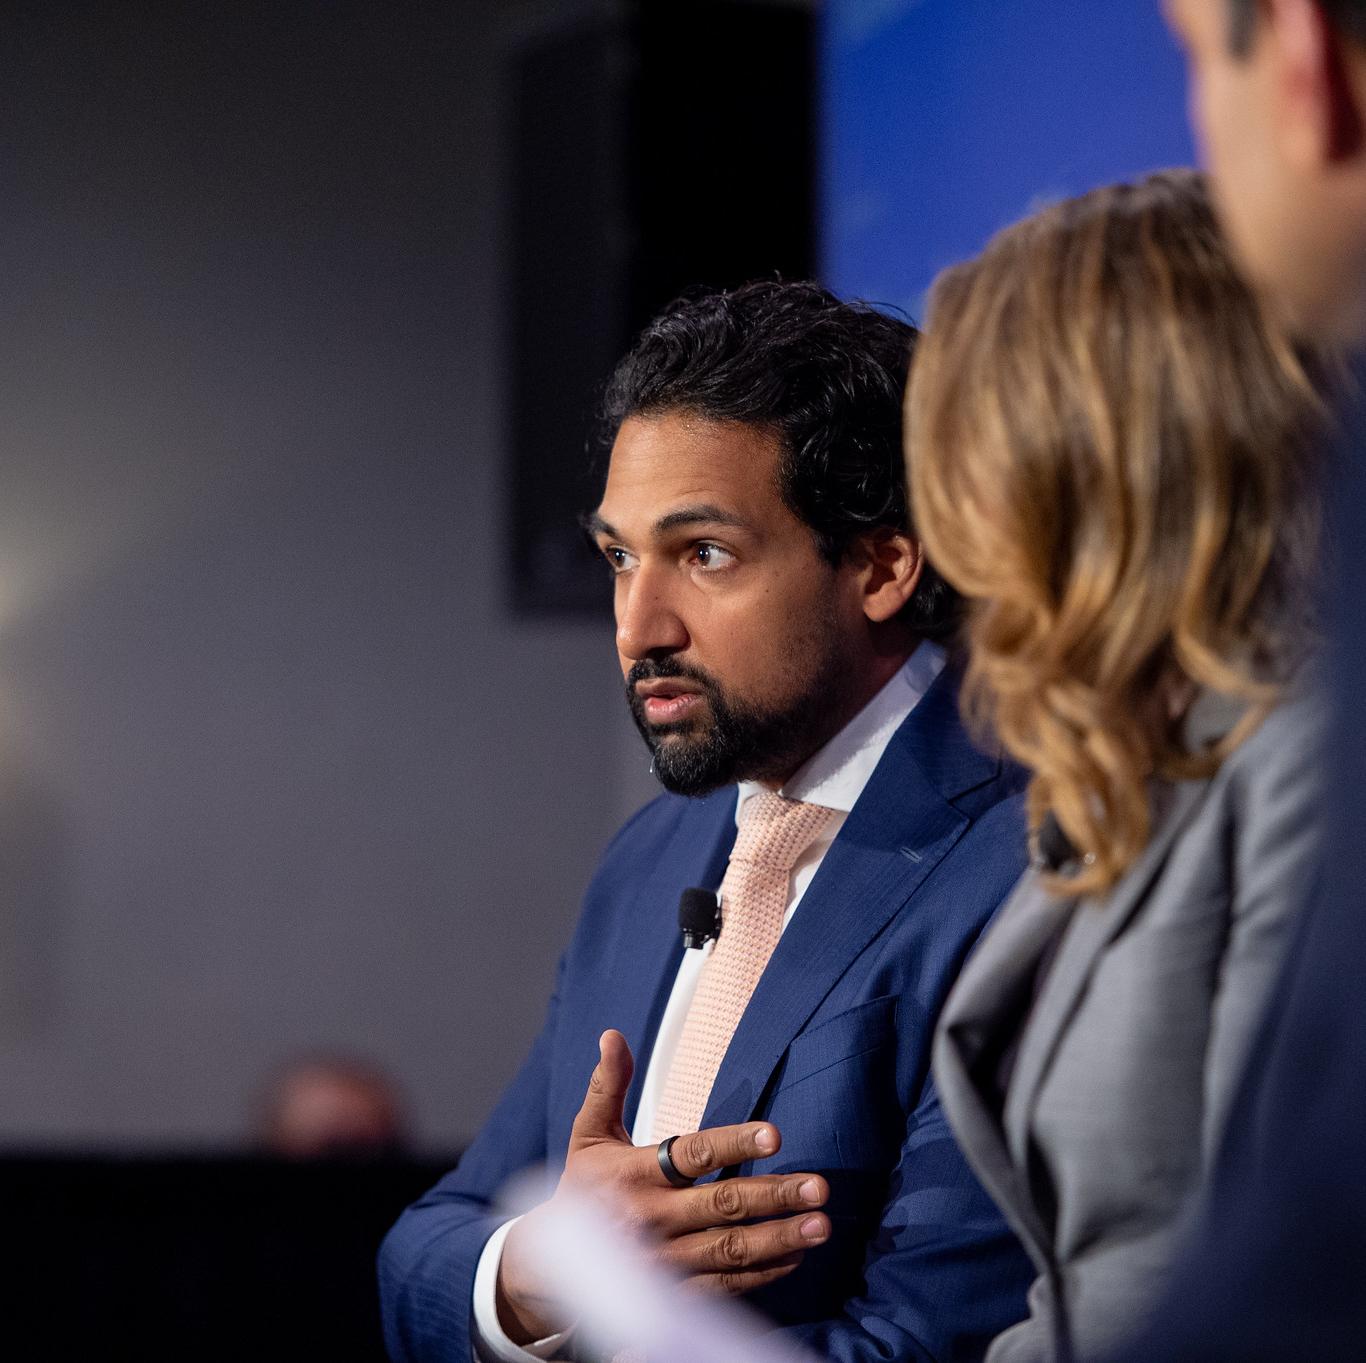 BMO Capital Markets’ Rahim Bapoo speaks in a panel discussion at the BloombergNEF Summit in San Francisco.